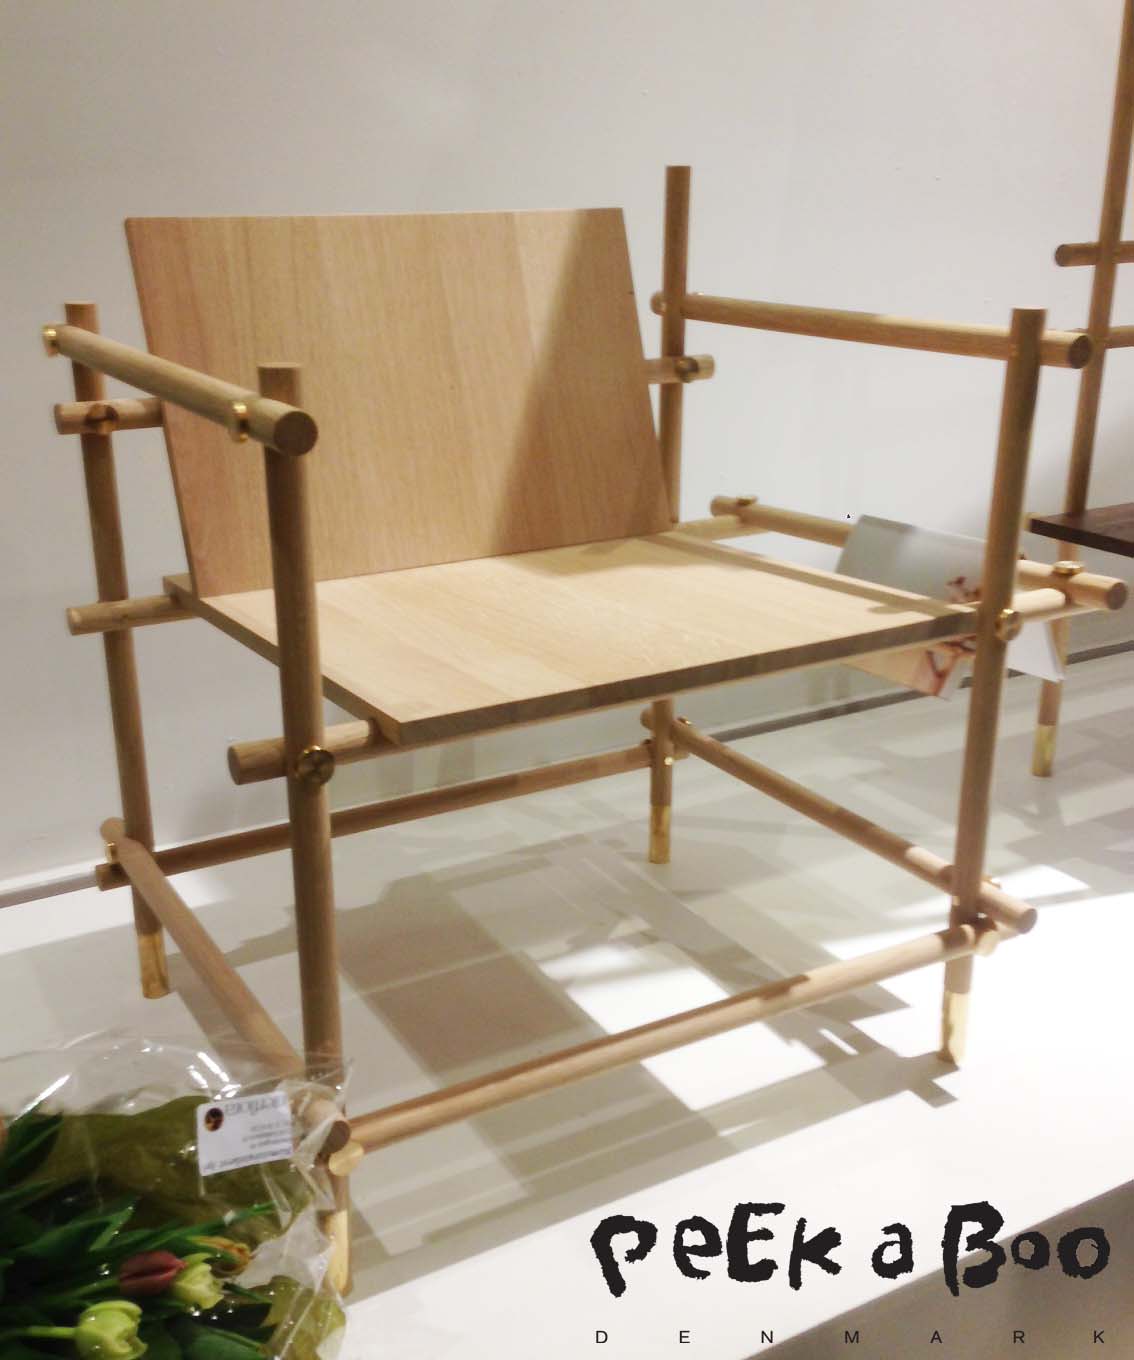 time to design winner 2013, Sanghyeok Lee's "useful chair"